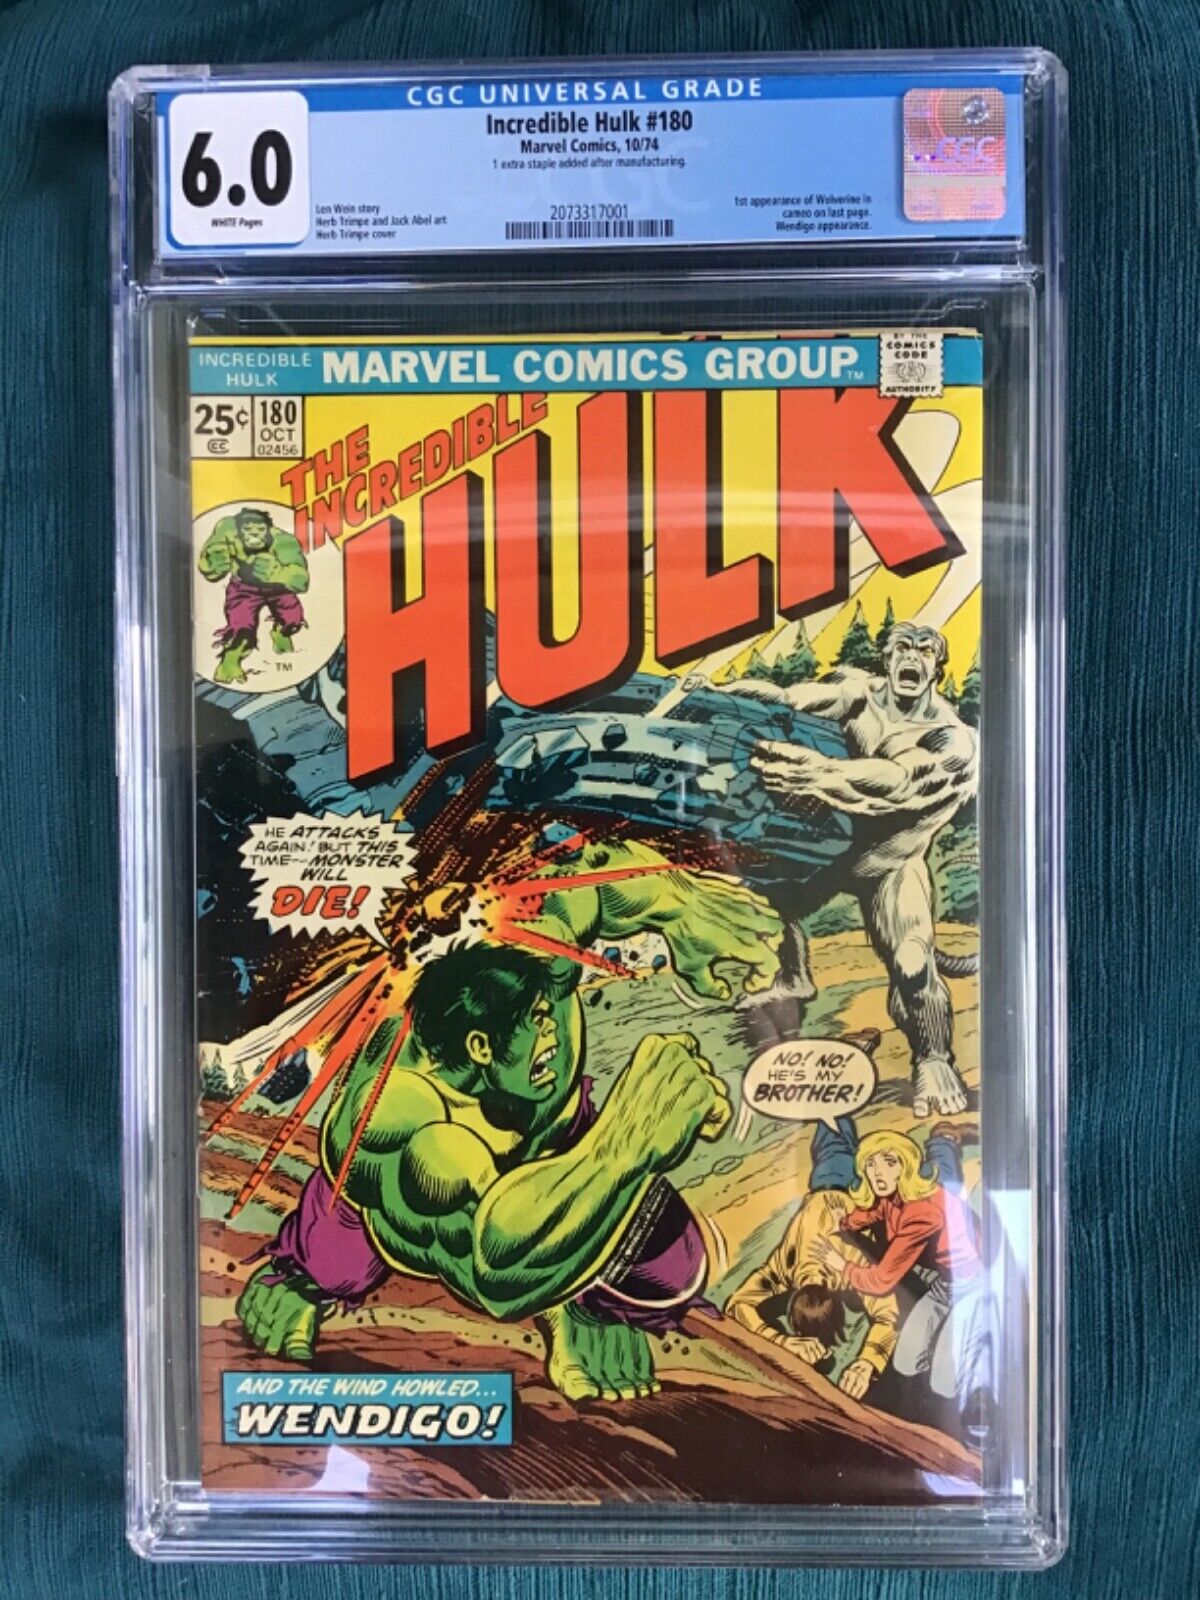 Incredible Hulk #180 Wolverine 1st Appearance (1974) CGC 6.0 WP Upcoming Movie